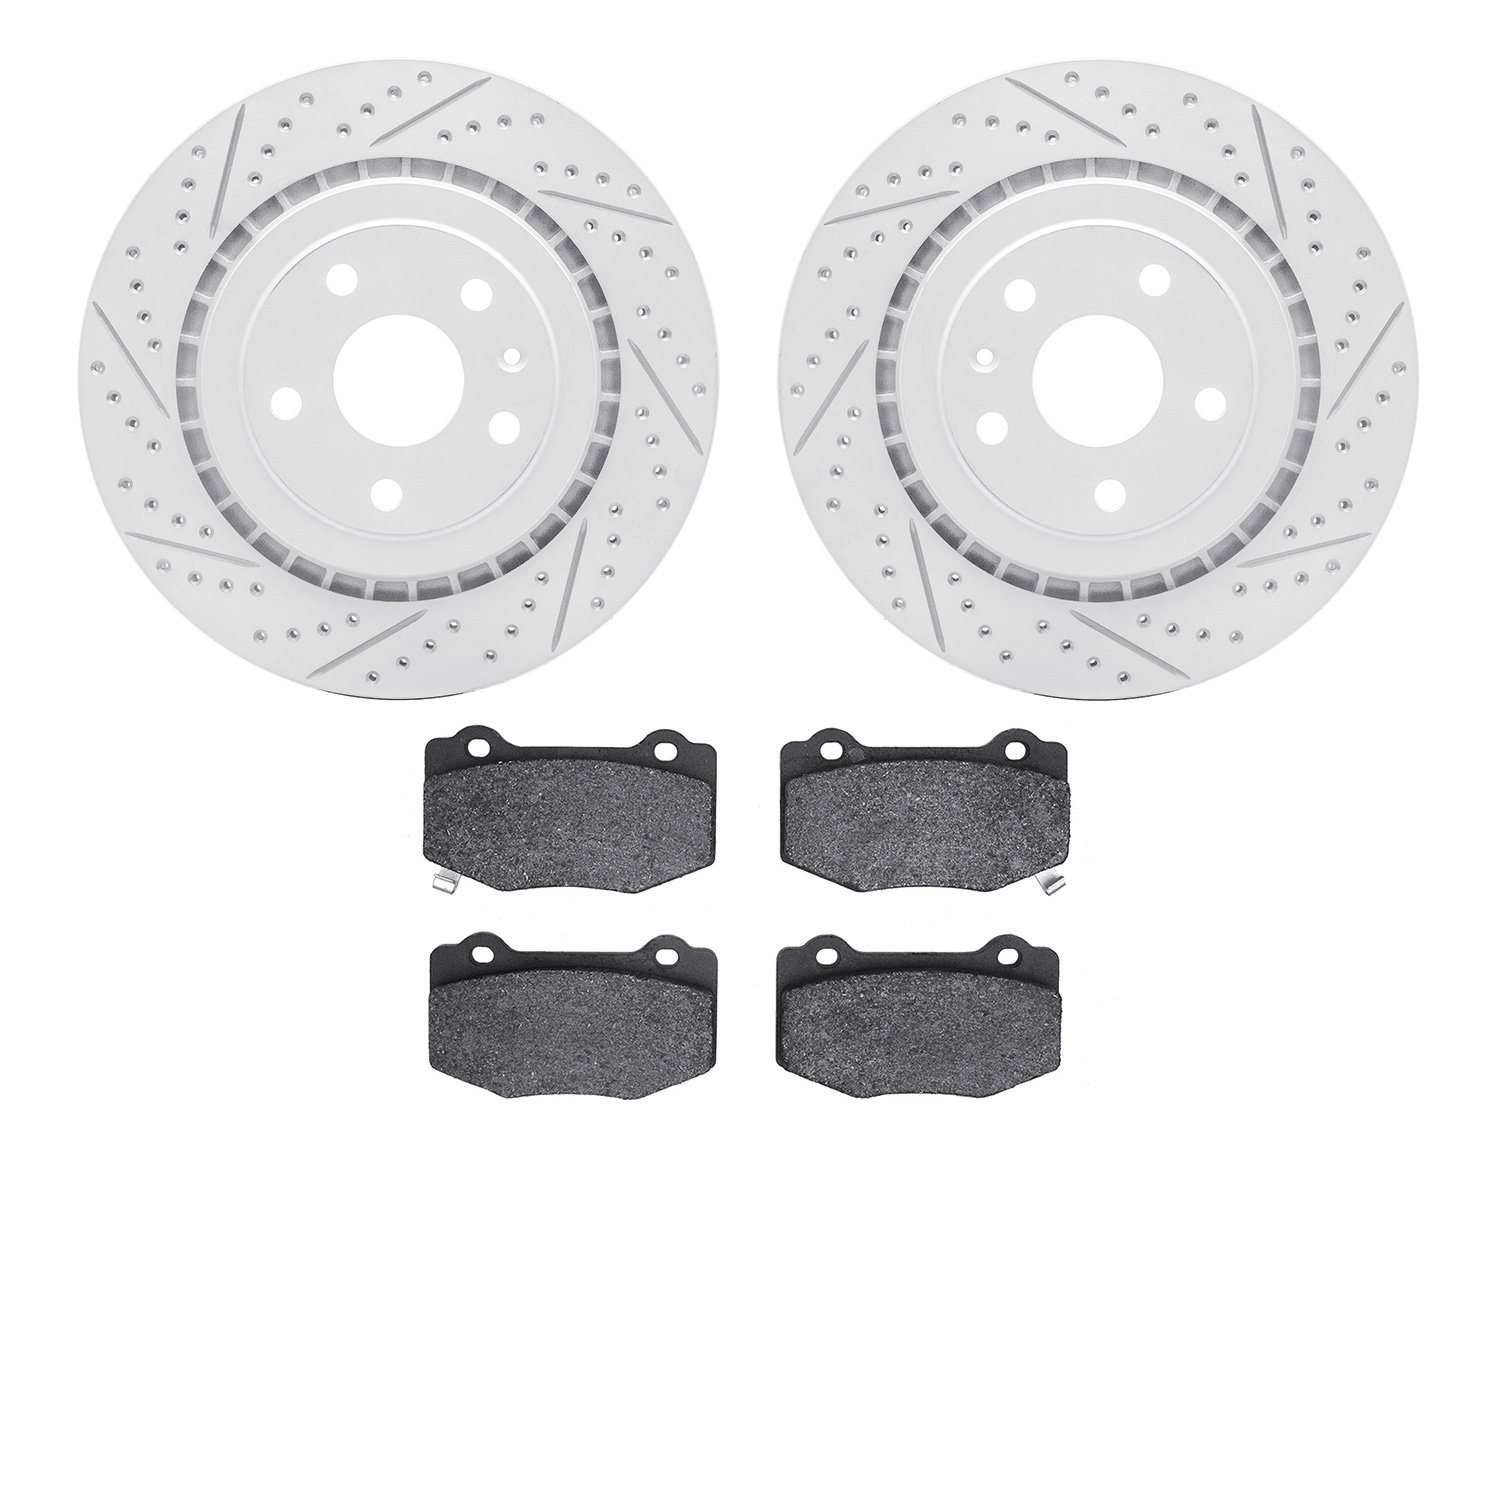 2502-47053 Geoperformance Drilled/Slotted Rotors w/5000 Advanced Brake Pads Kit, Fits Select GM, Position: Rear